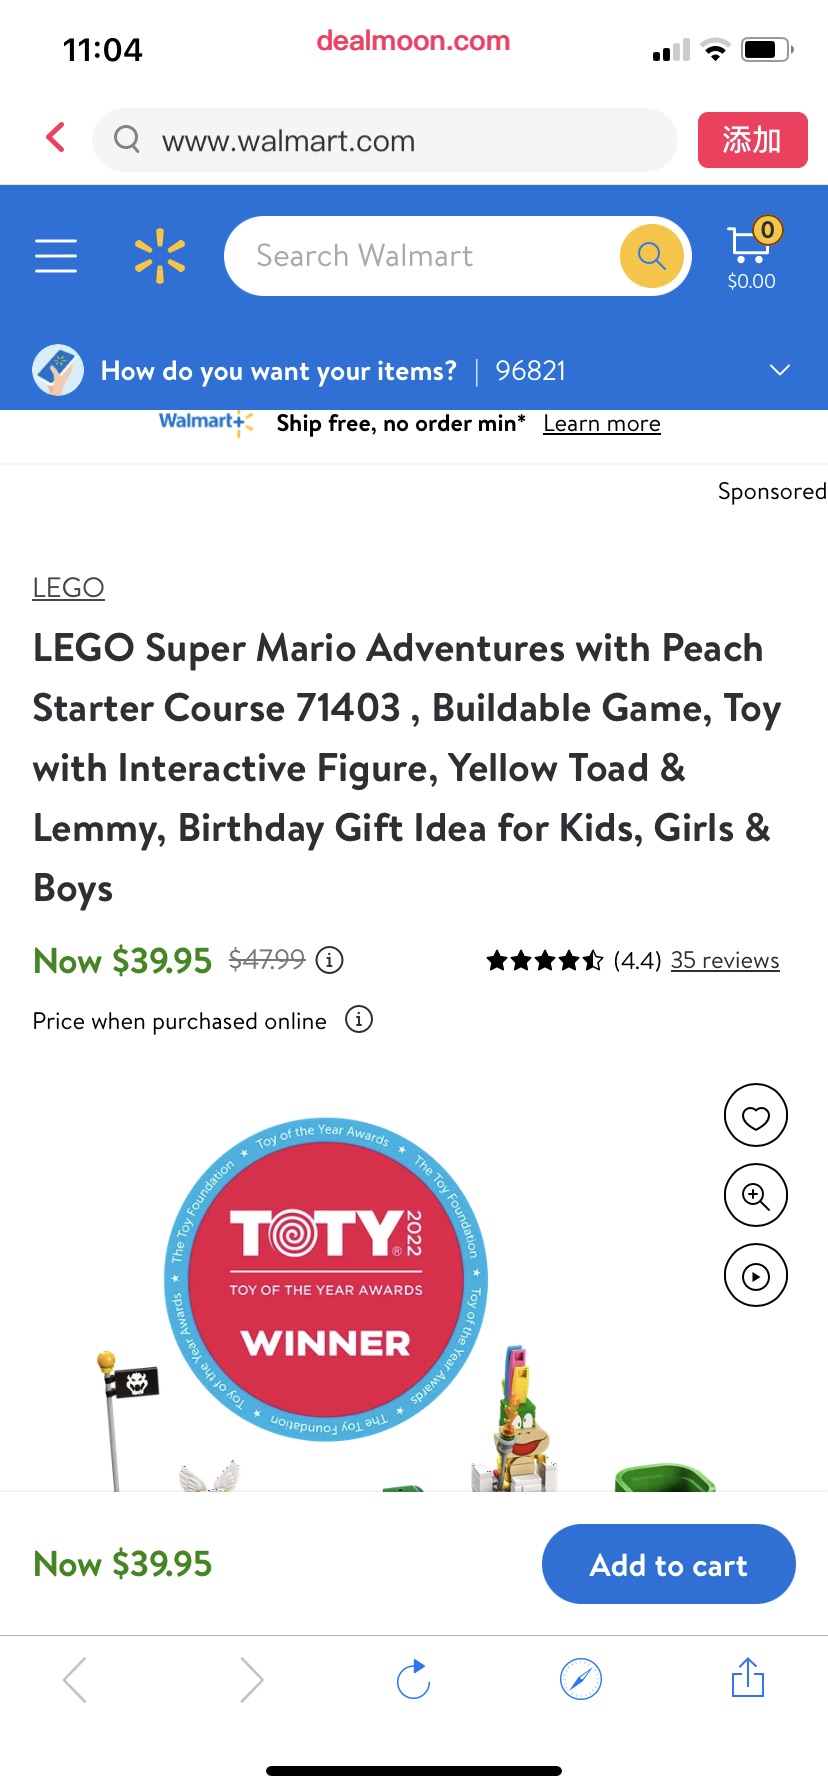 LEGO Super Mario Adventures with Peach Starter Course 71403 , Buildable Game, Toy with Interactive Figure, Yellow Toad & Lemmy, Birthday Gift Idea for Kids, Girls & Boys - 乐高 马里奥